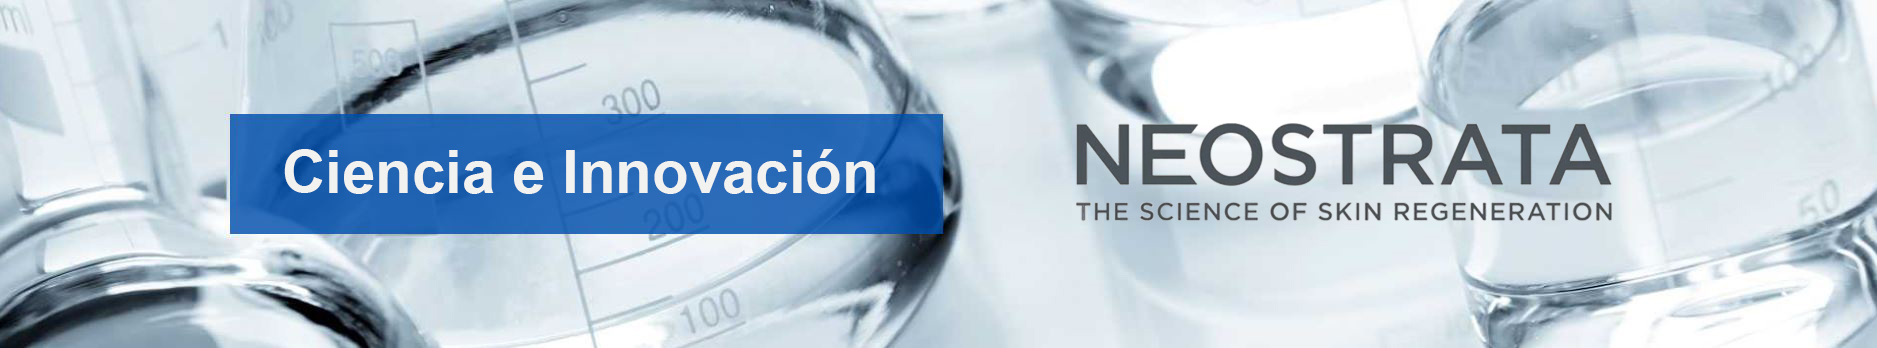 NEOSTRATA Science and Innovation